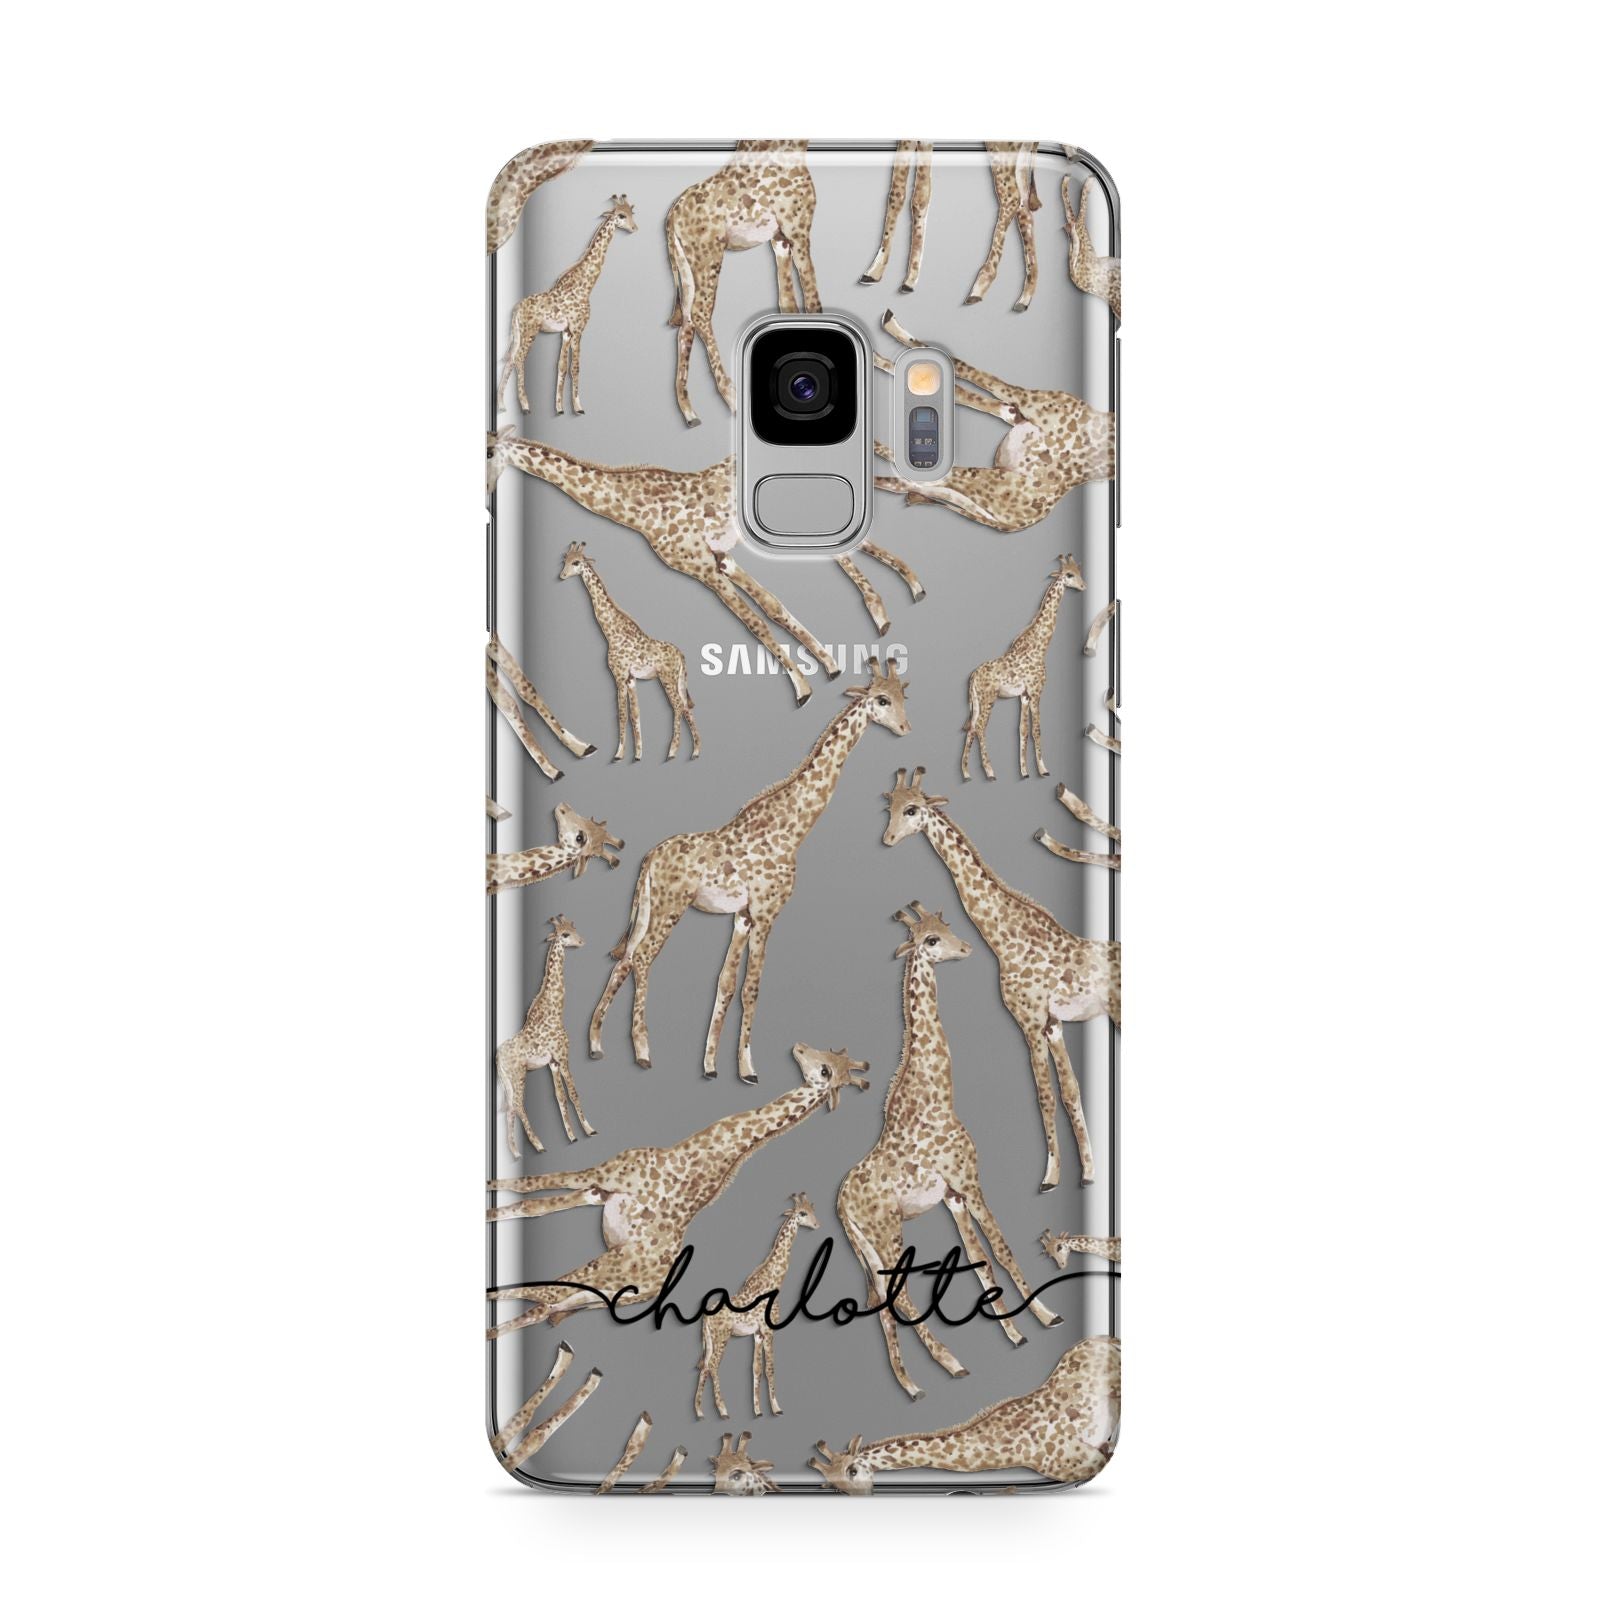 Personalised Giraffes with Name Samsung Galaxy S9 Case